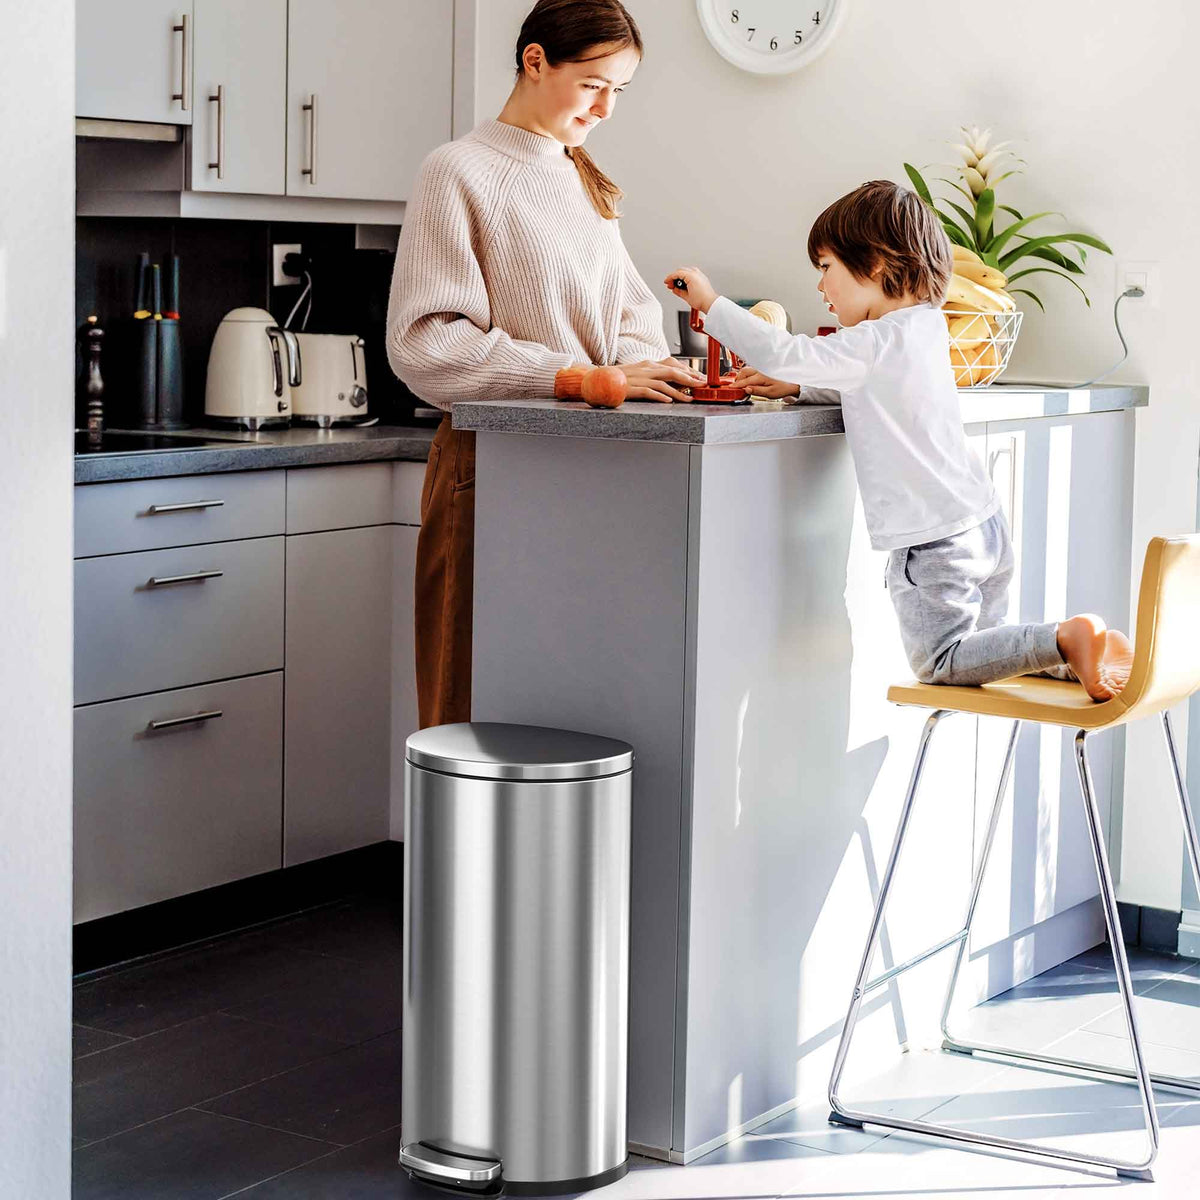 8 Gallon / 30 Liter SoftStep Semi-Round Step Pedal Trash Can in kitchen